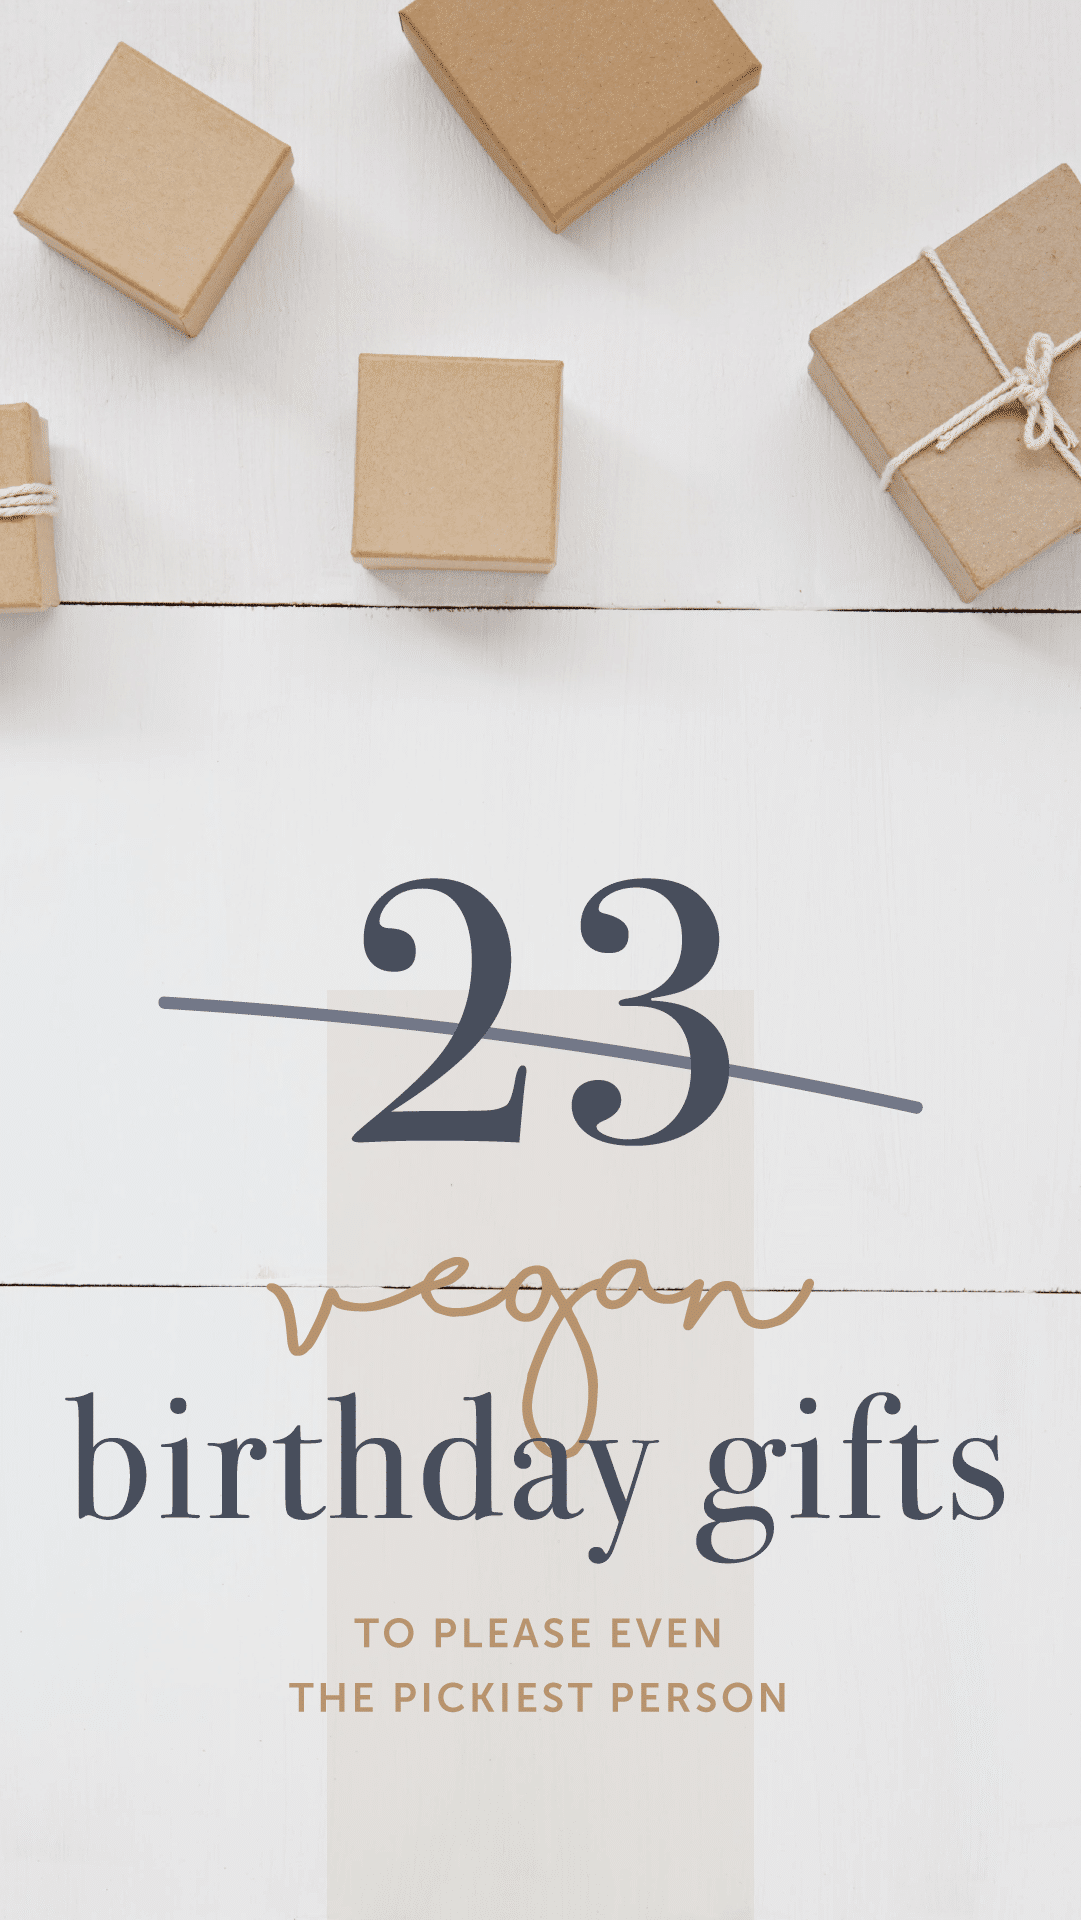 23 Vegan Birthday Gift Ideas to Please Even the Pickiest Person